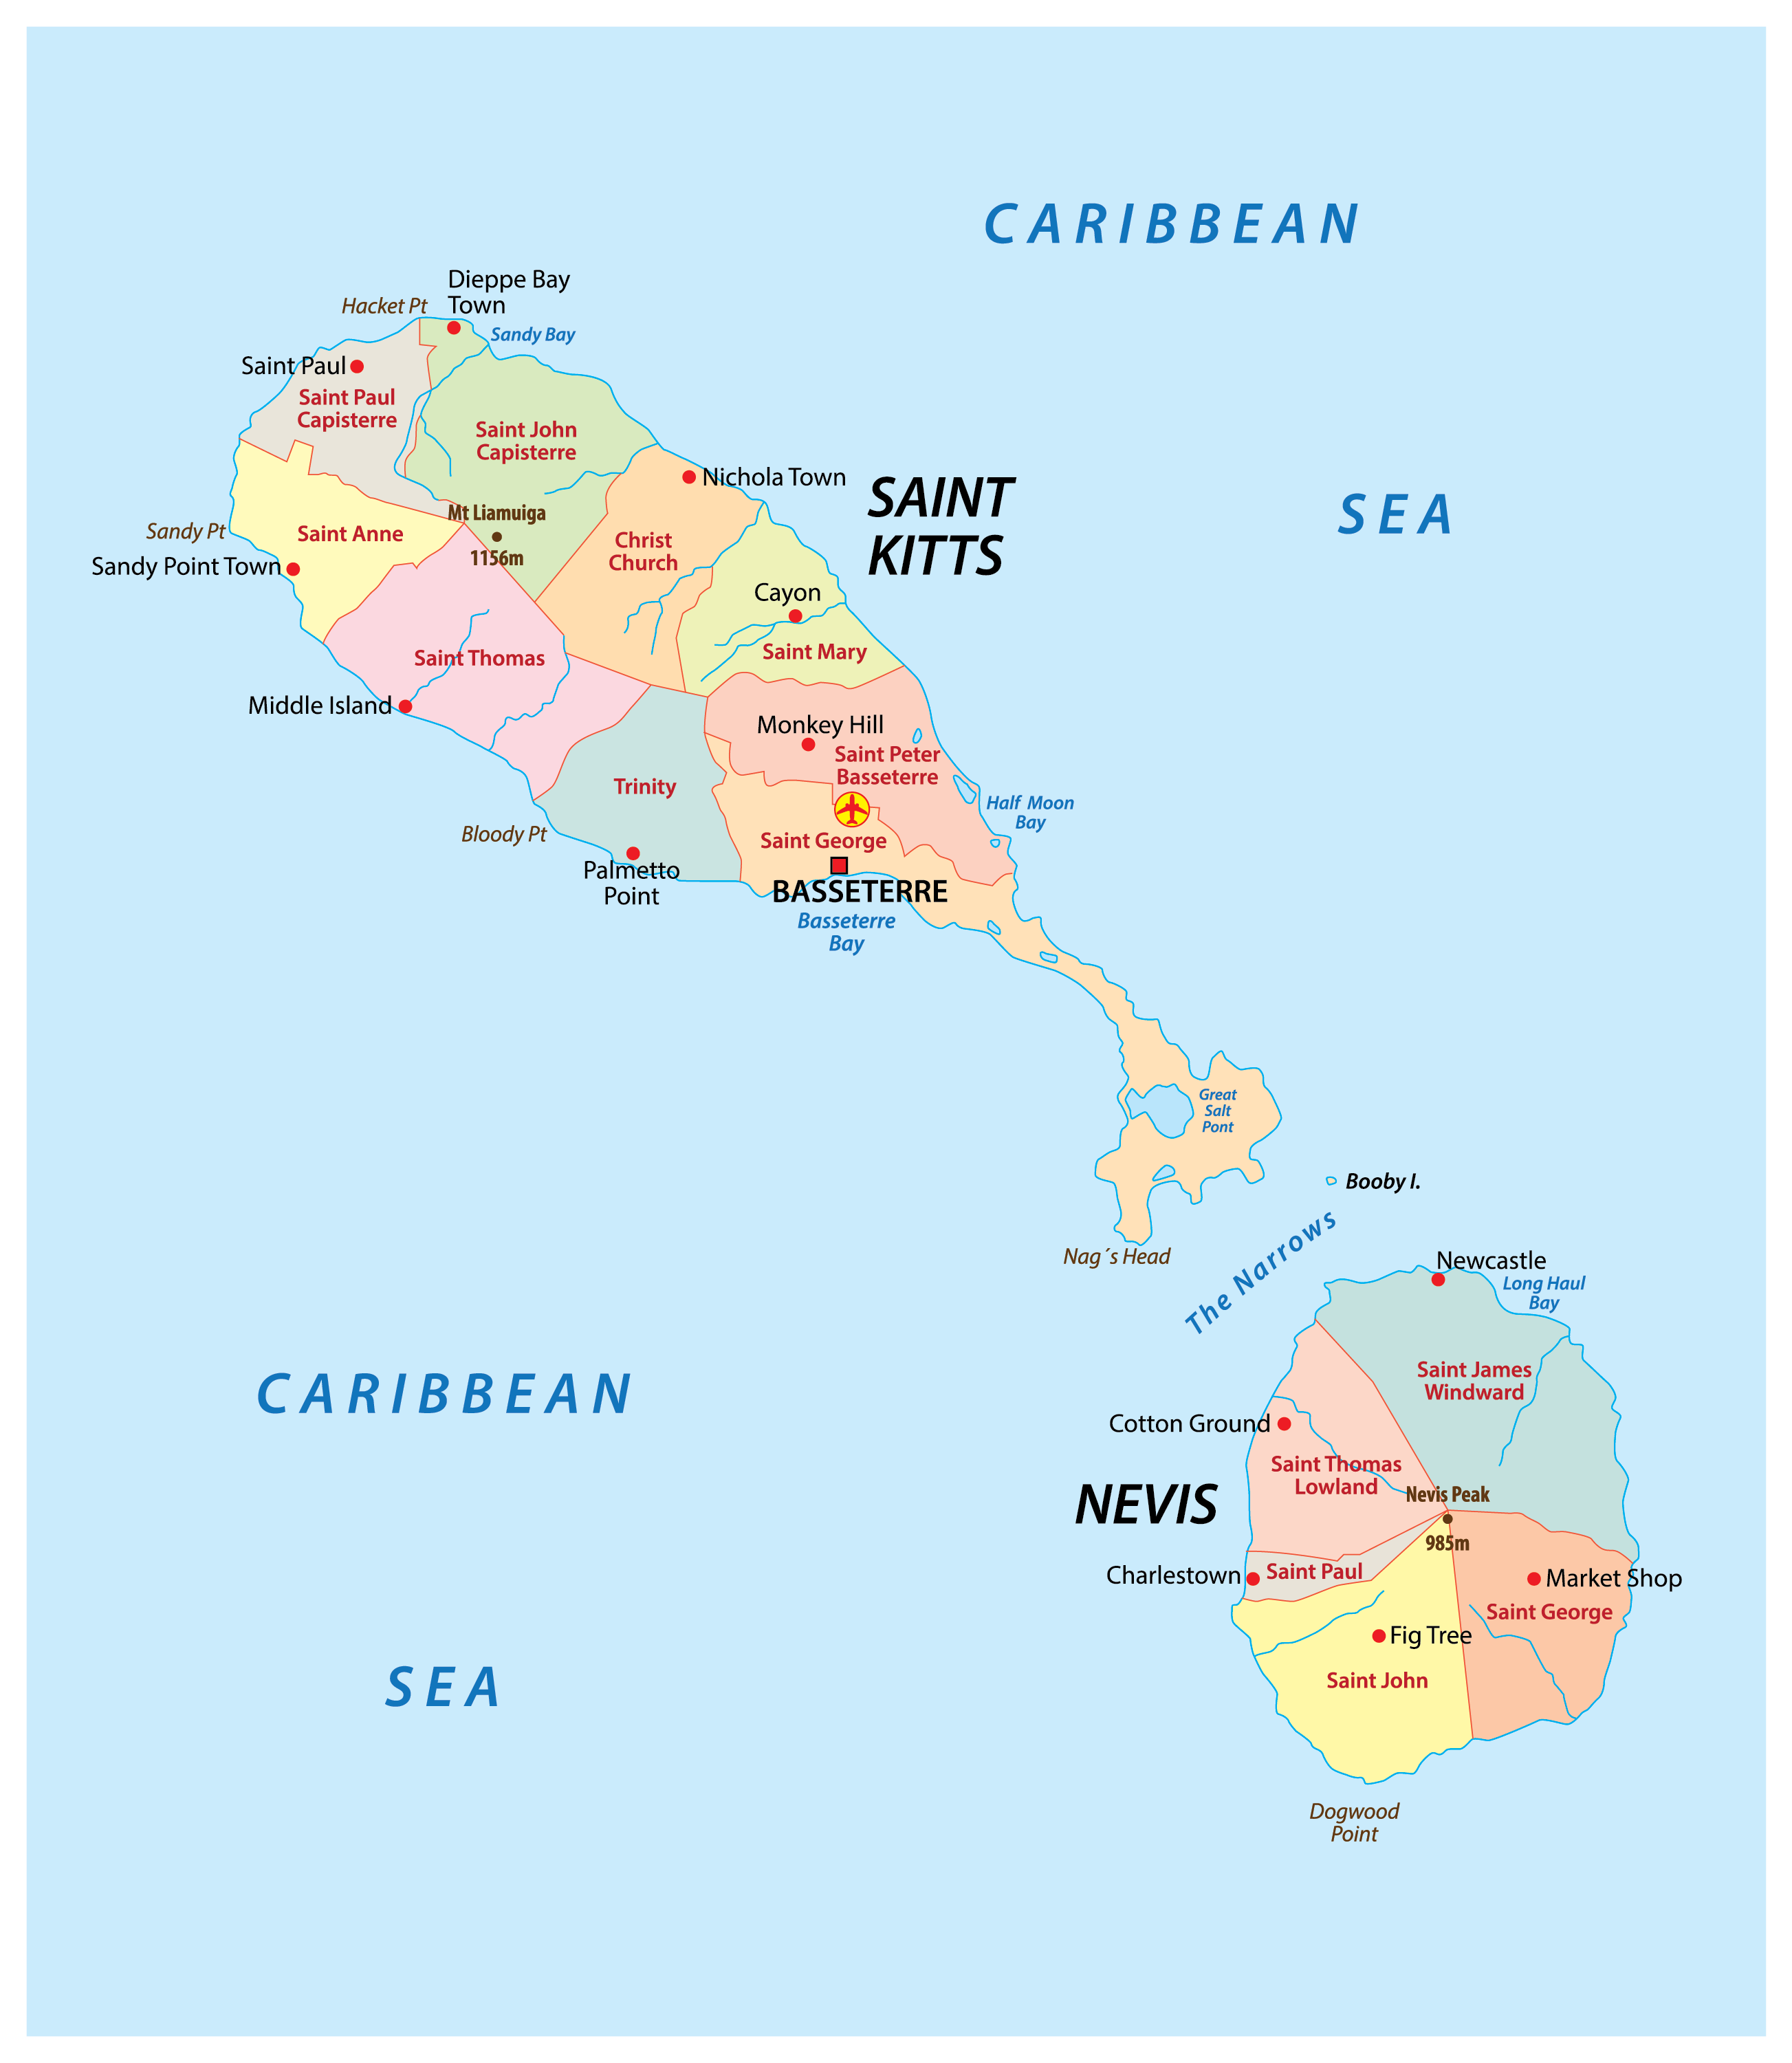 24103657 4 saint kitts and nevis map